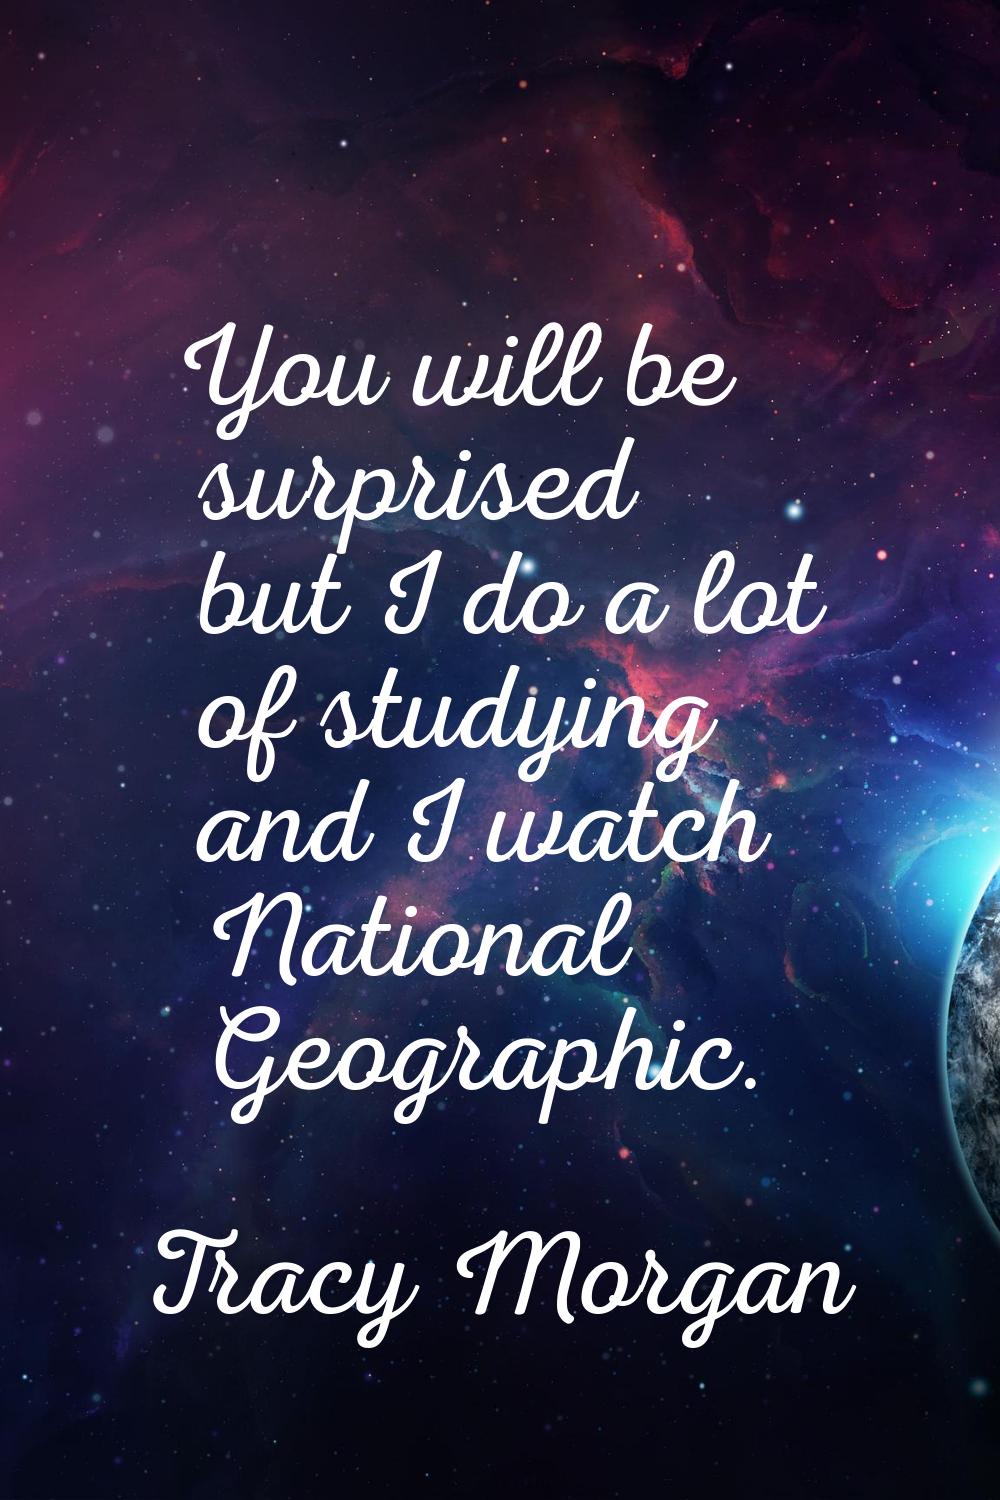 You will be surprised but I do a lot of studying and I watch National Geographic.